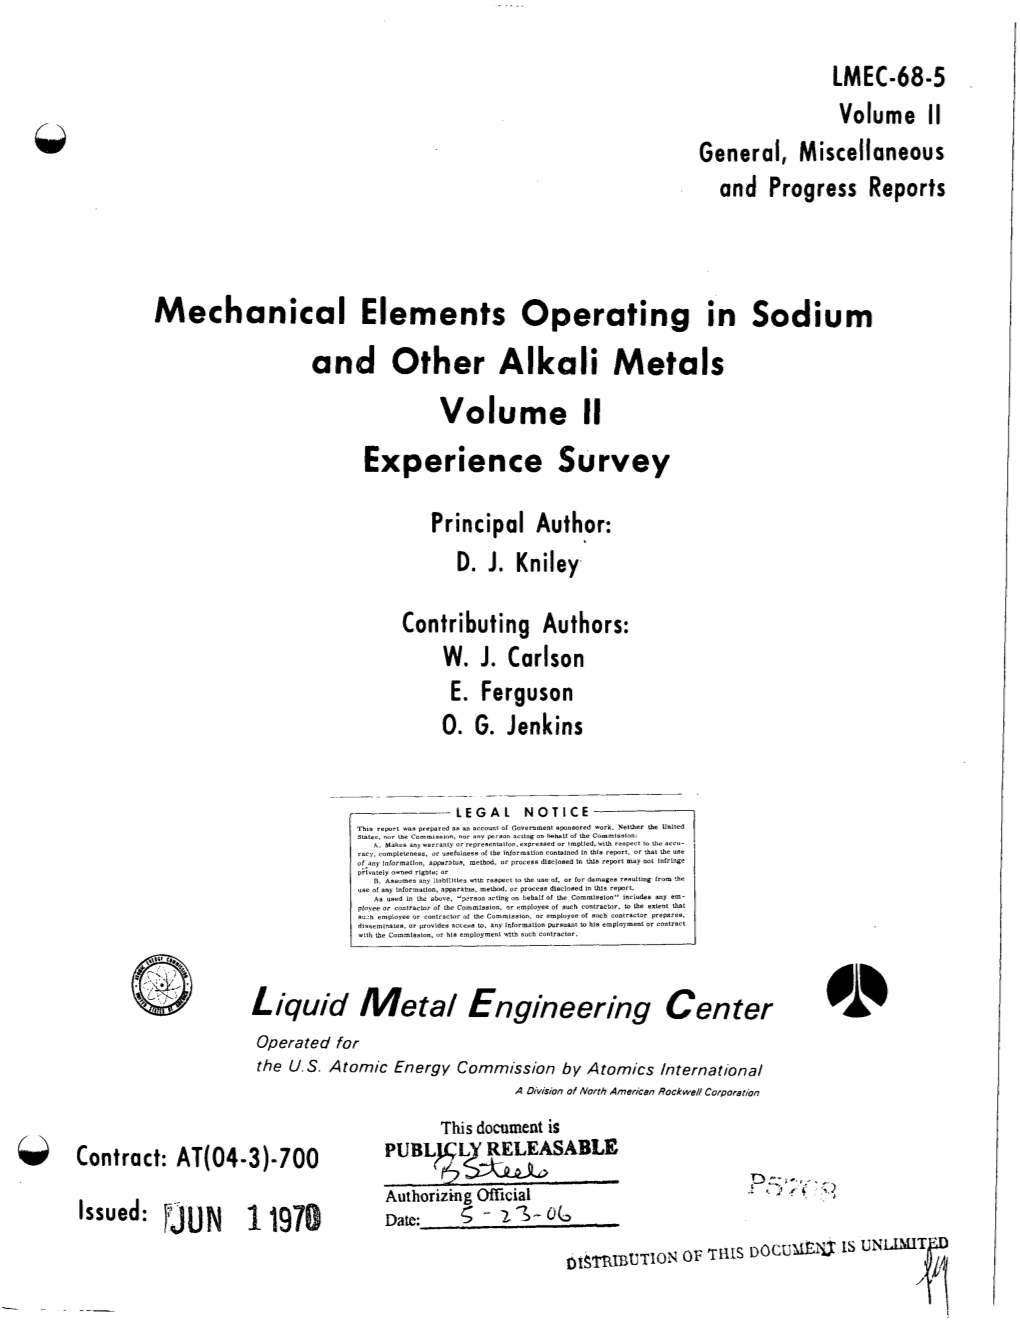 Mechanical Elements Operating in Sodium and Other Alkali Metals Volume II Experience Survey